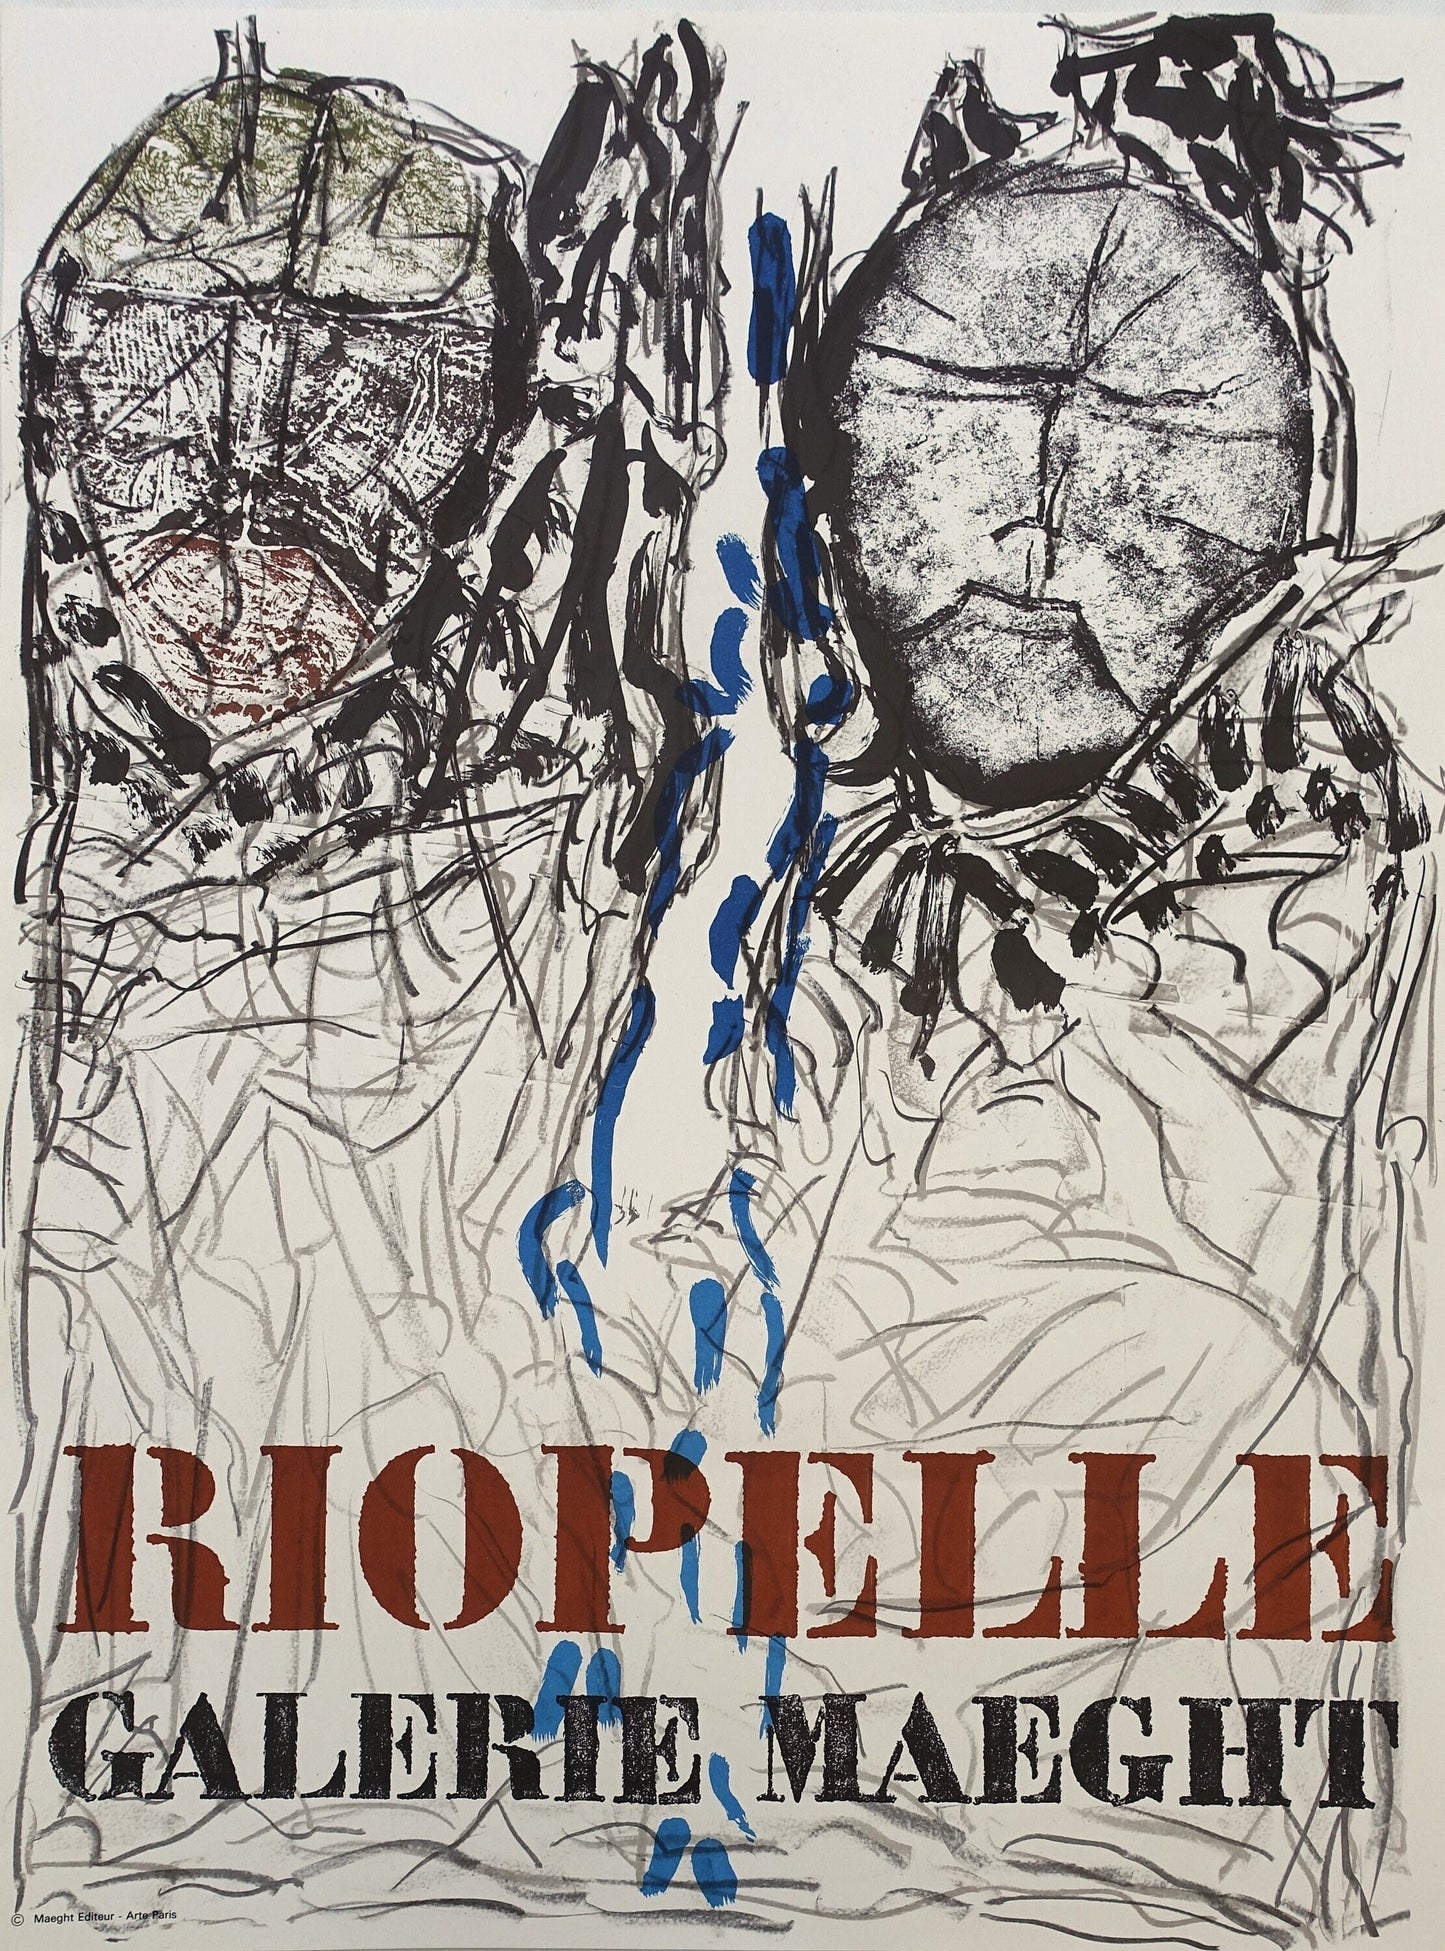 1974 Riopelle Exhibition Poster Galerie Maeght - Original Vintage Poster